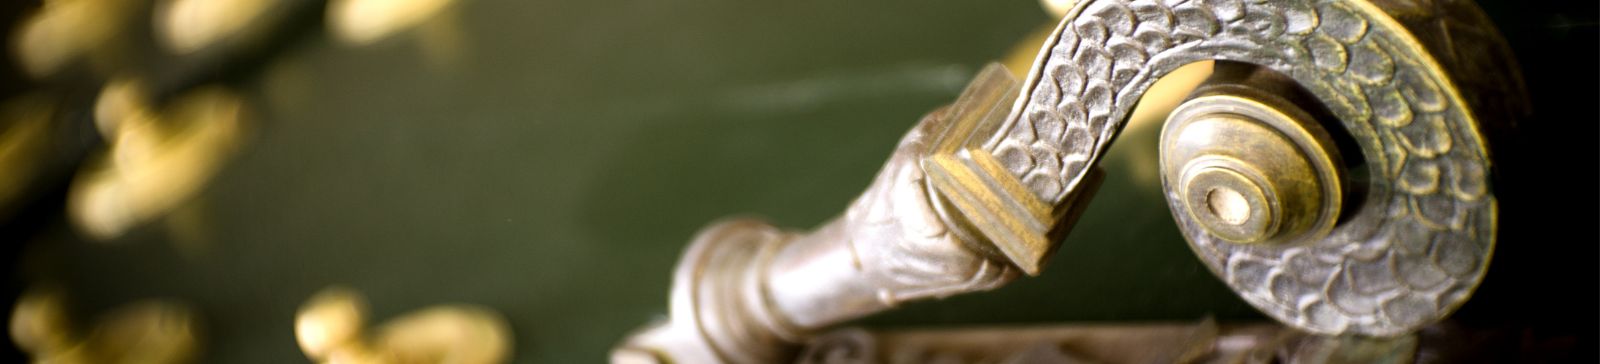 A close-up look to antique lock handle